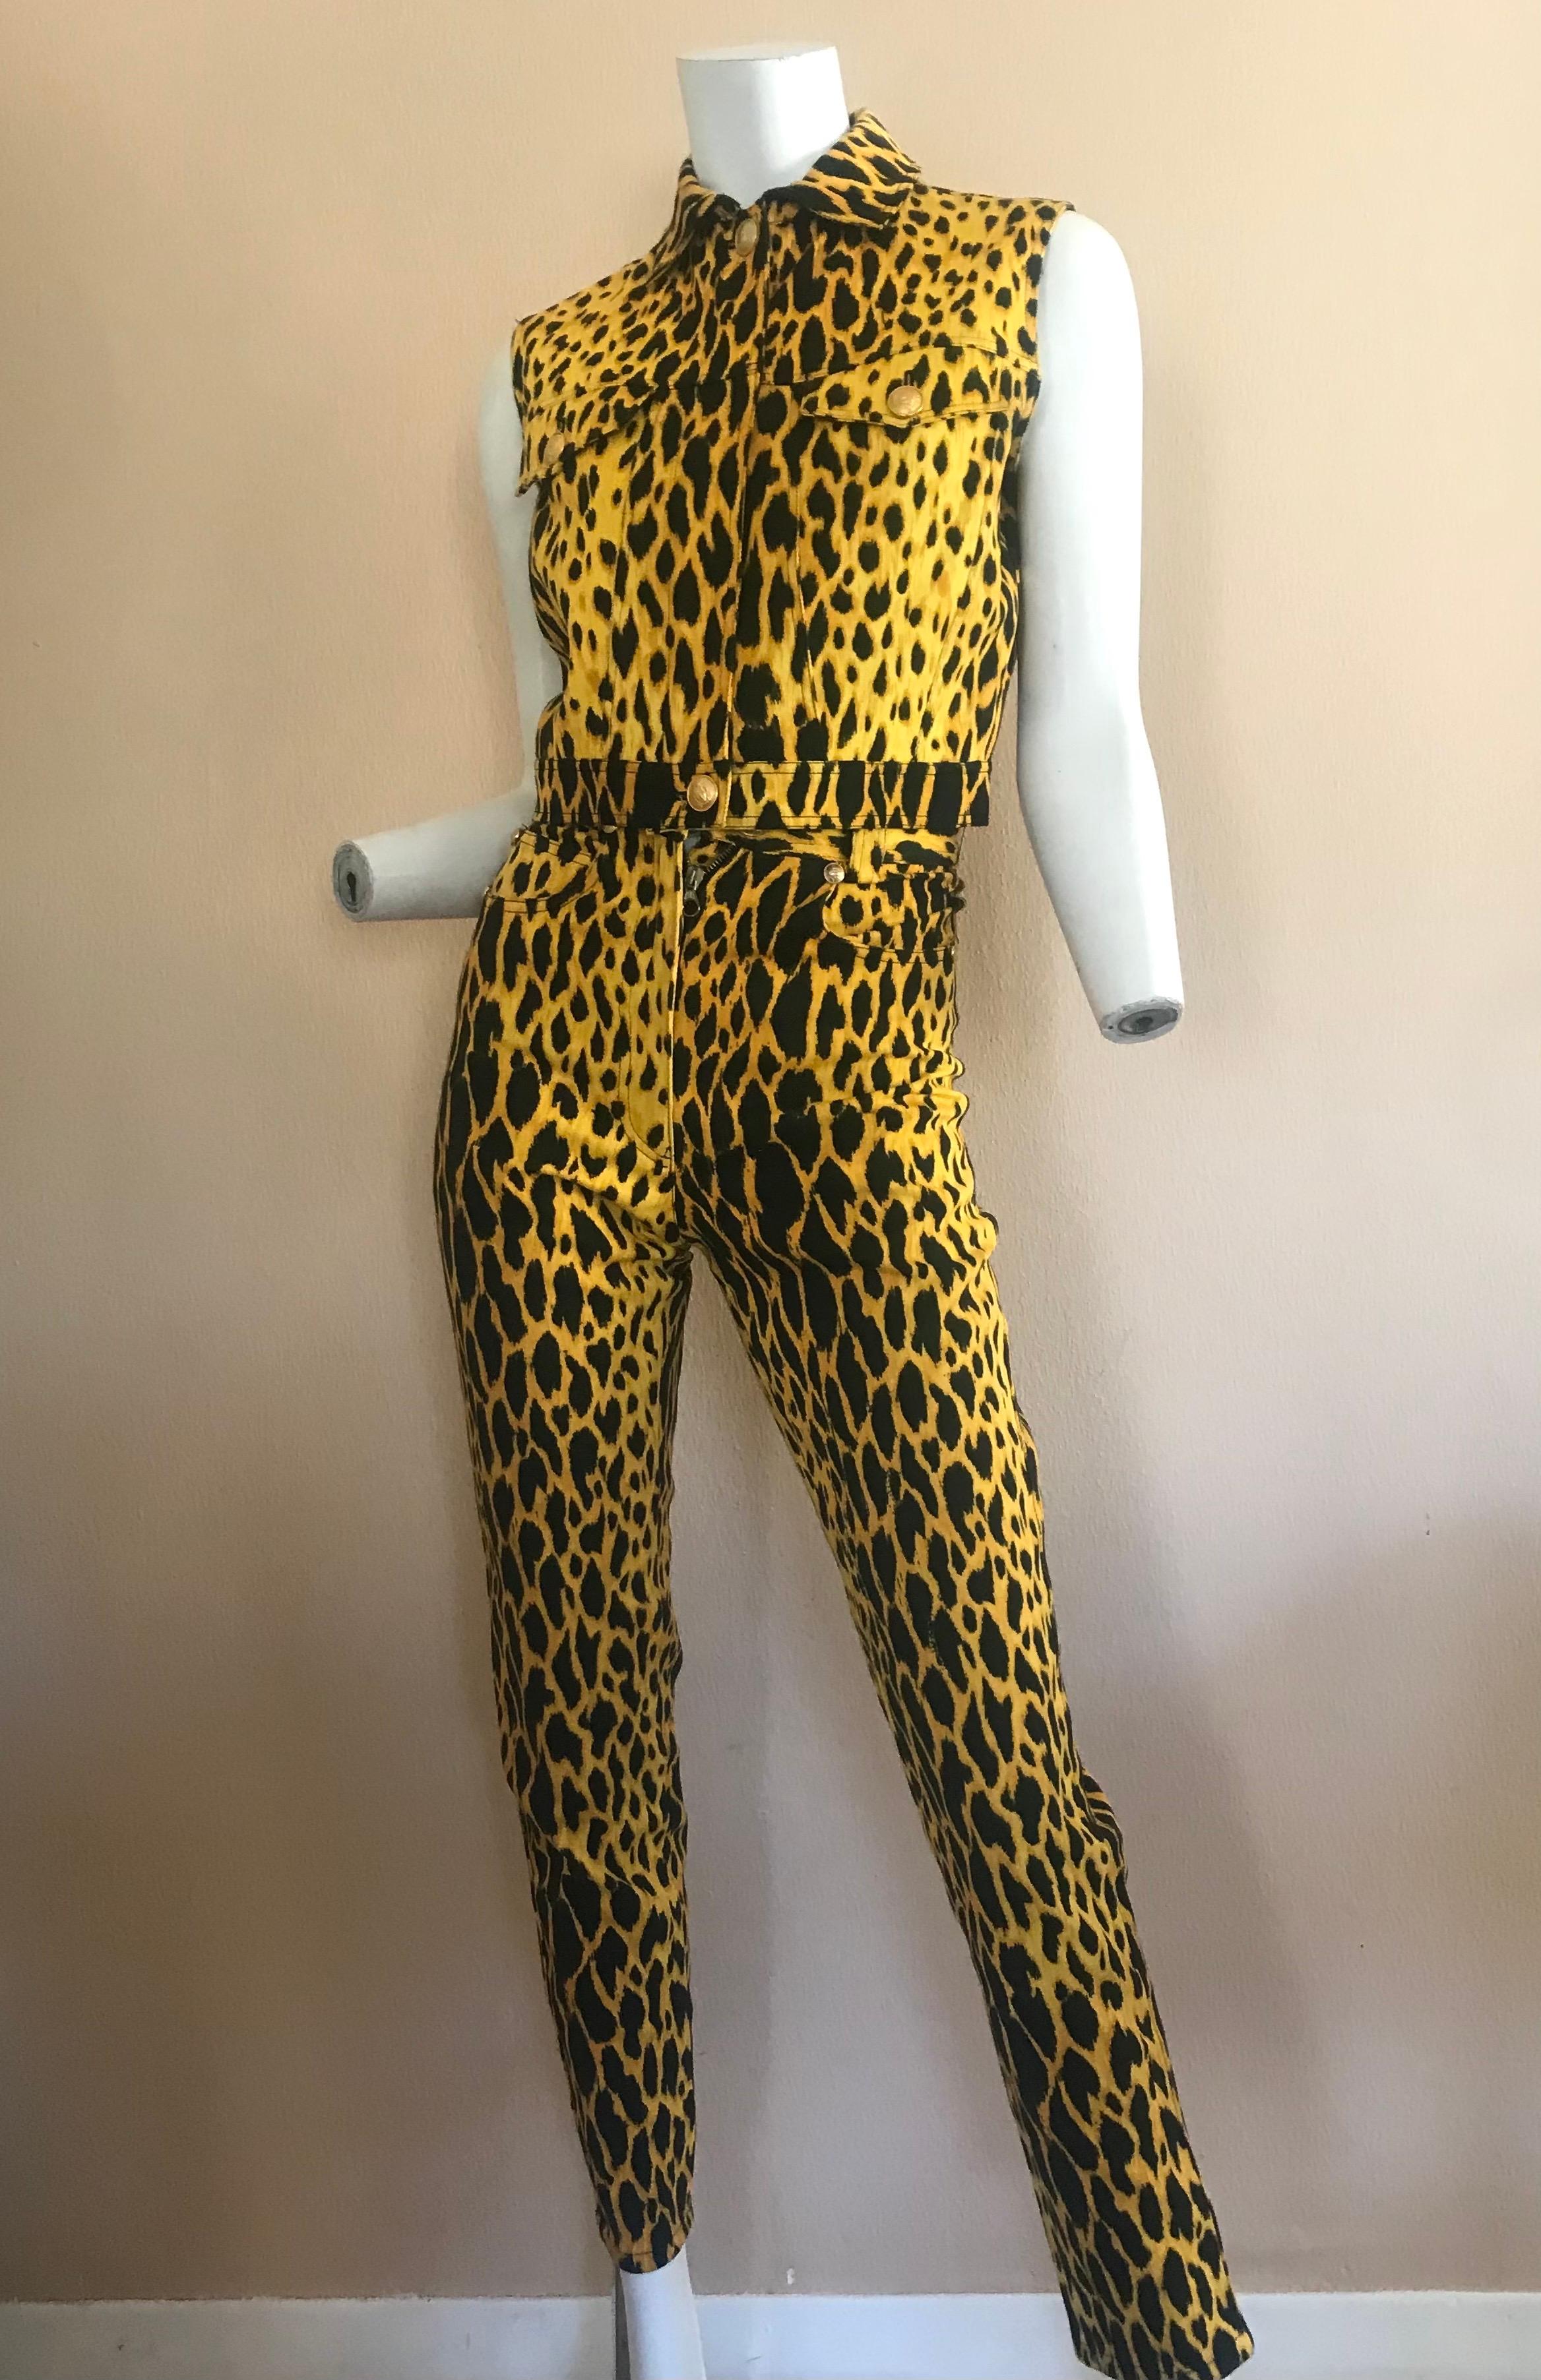 1992 Gianni Versace Denim Leopard Vest and Jeans In Excellent Condition For Sale In Austin, TX